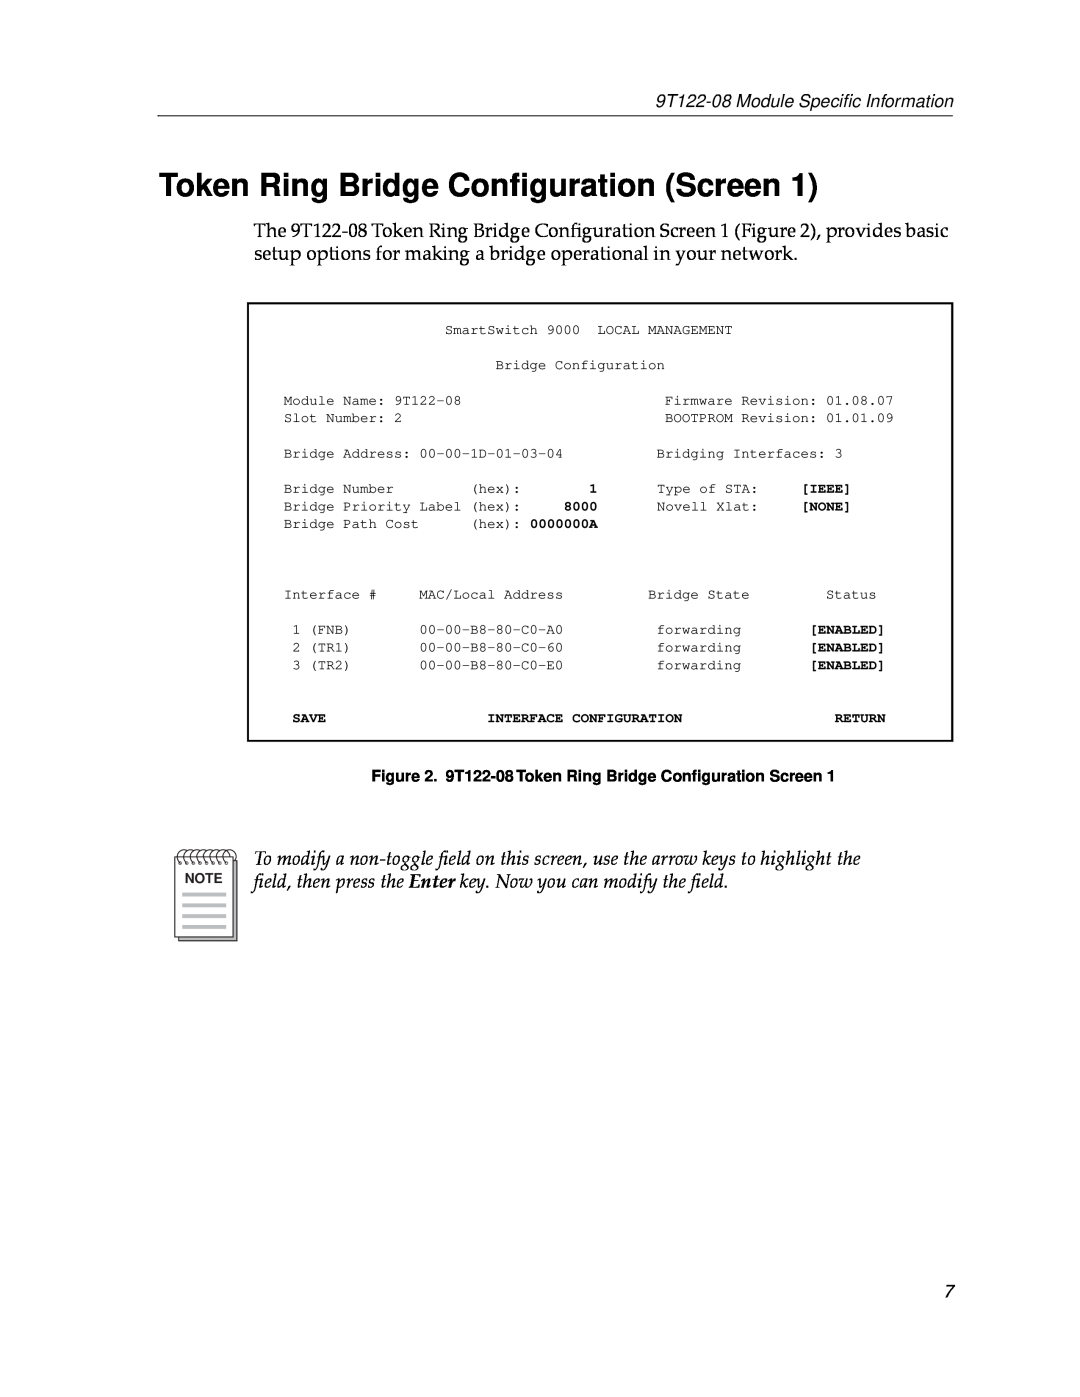 Cabletron Systems Token Ring Bridge Conﬁguration Screen, 9T122-08 Module Speciﬁc Information, Ieee, None, Save, Return 